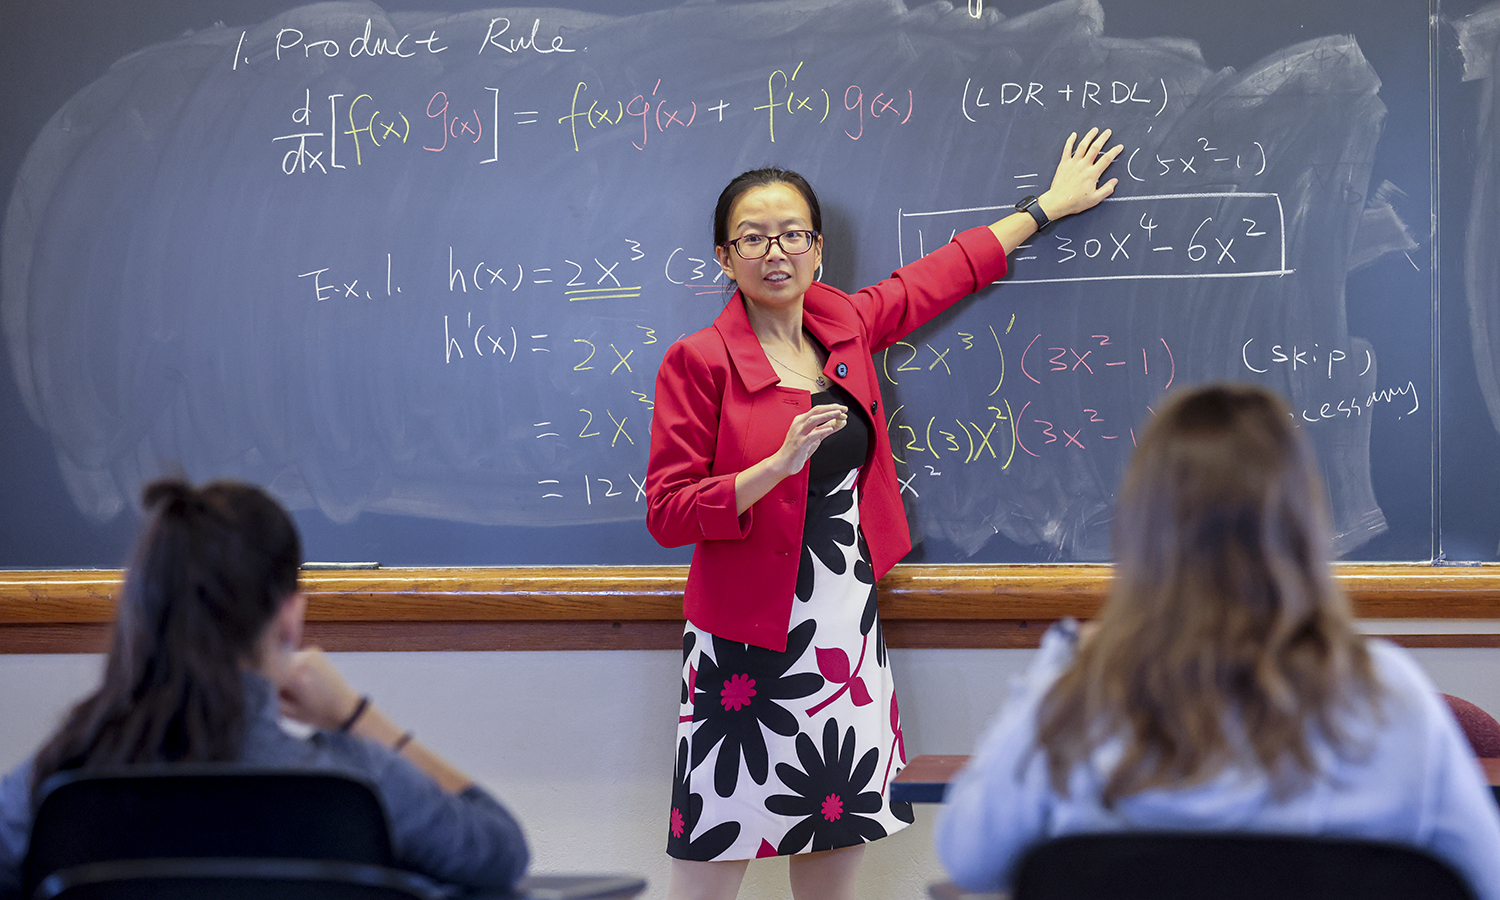 Associate Professor of Mathematics and Computer Science Yan Hao teaches calculus in Coxe Hall on Friday.